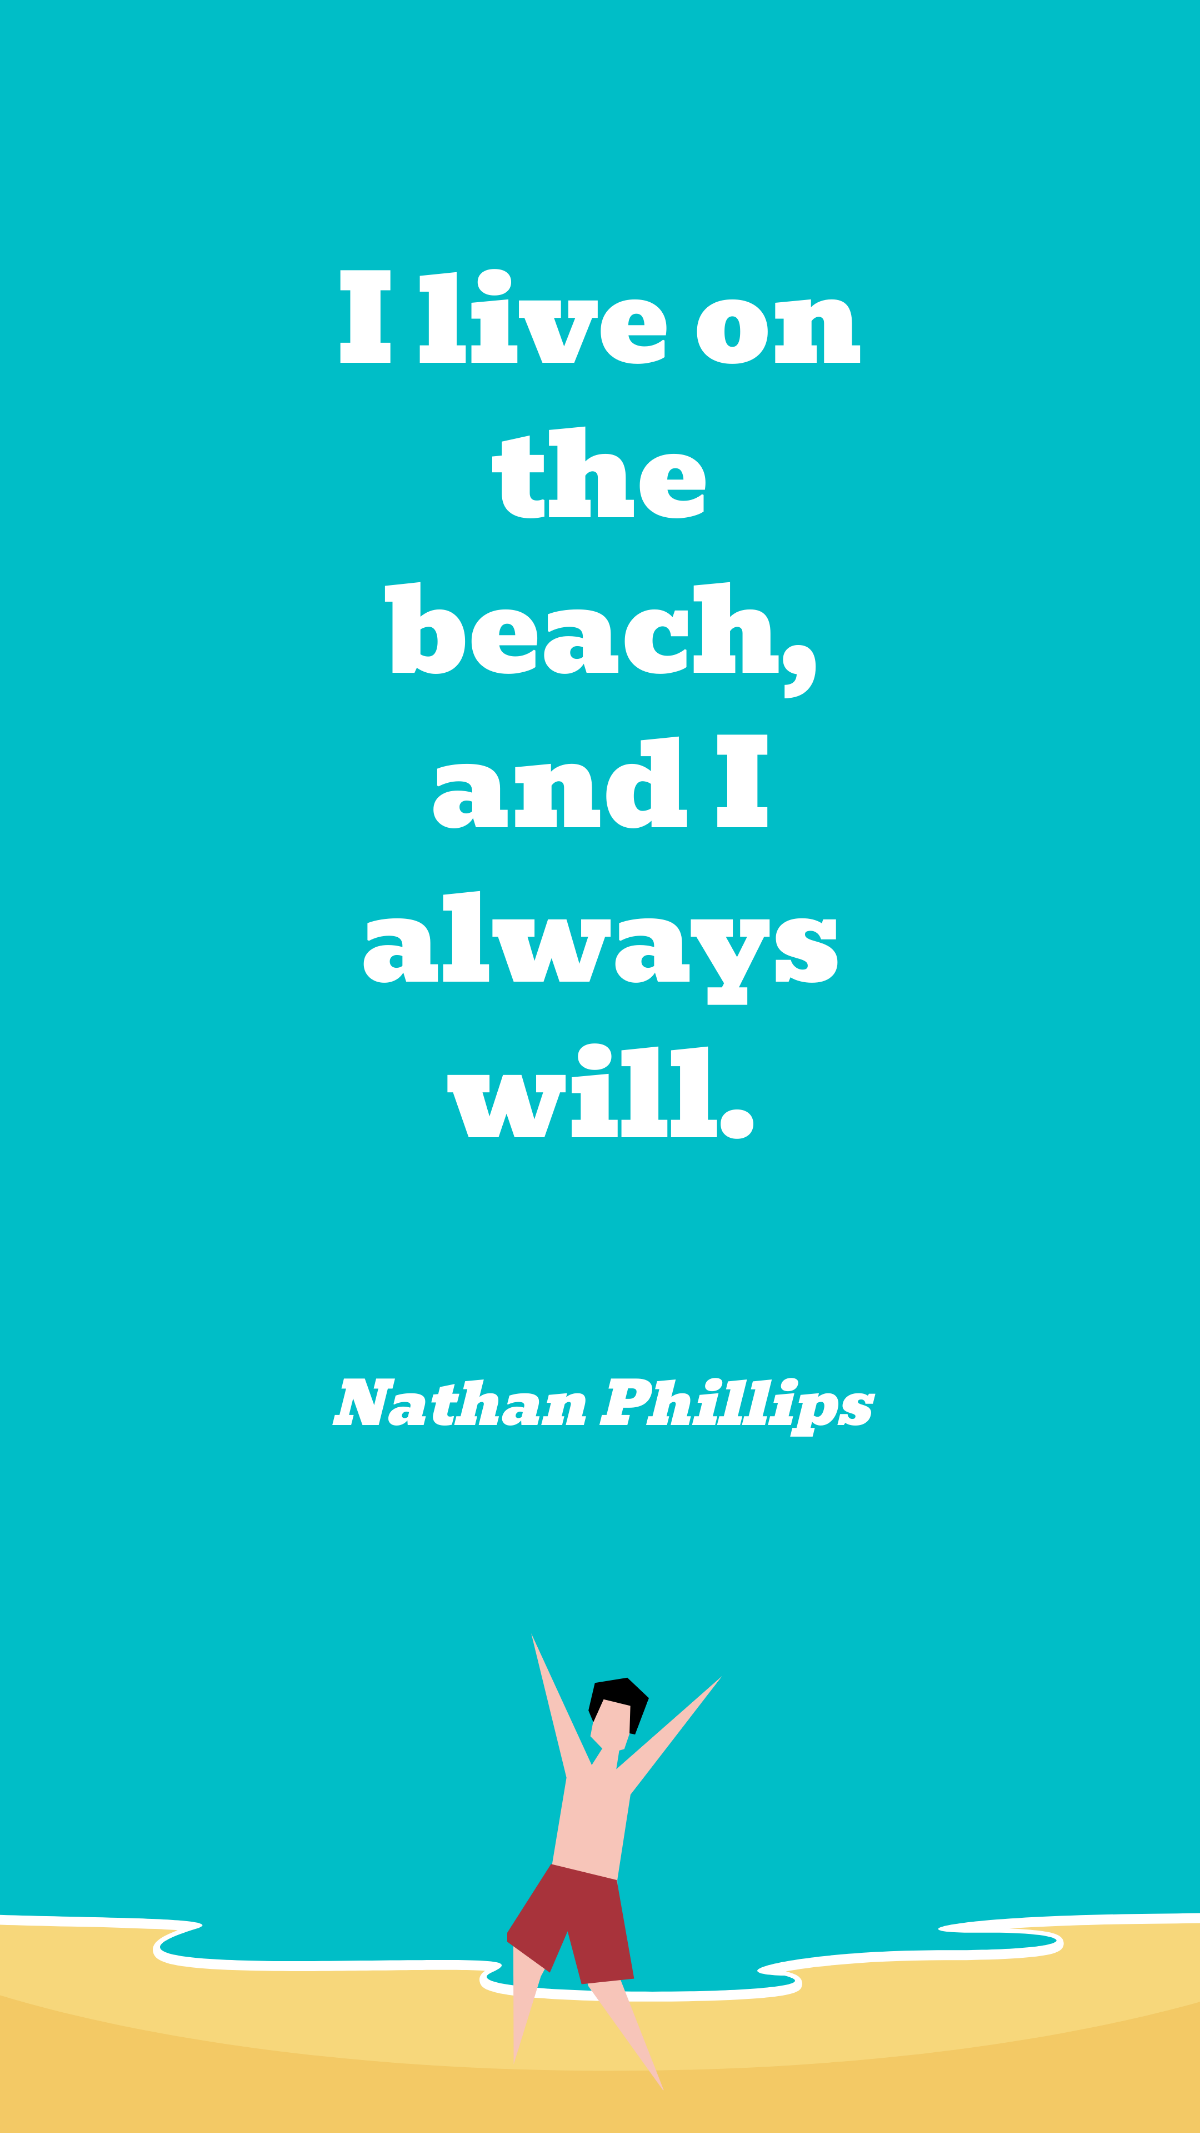 Nathan Phillips - I live on the beach, and I always will. Template